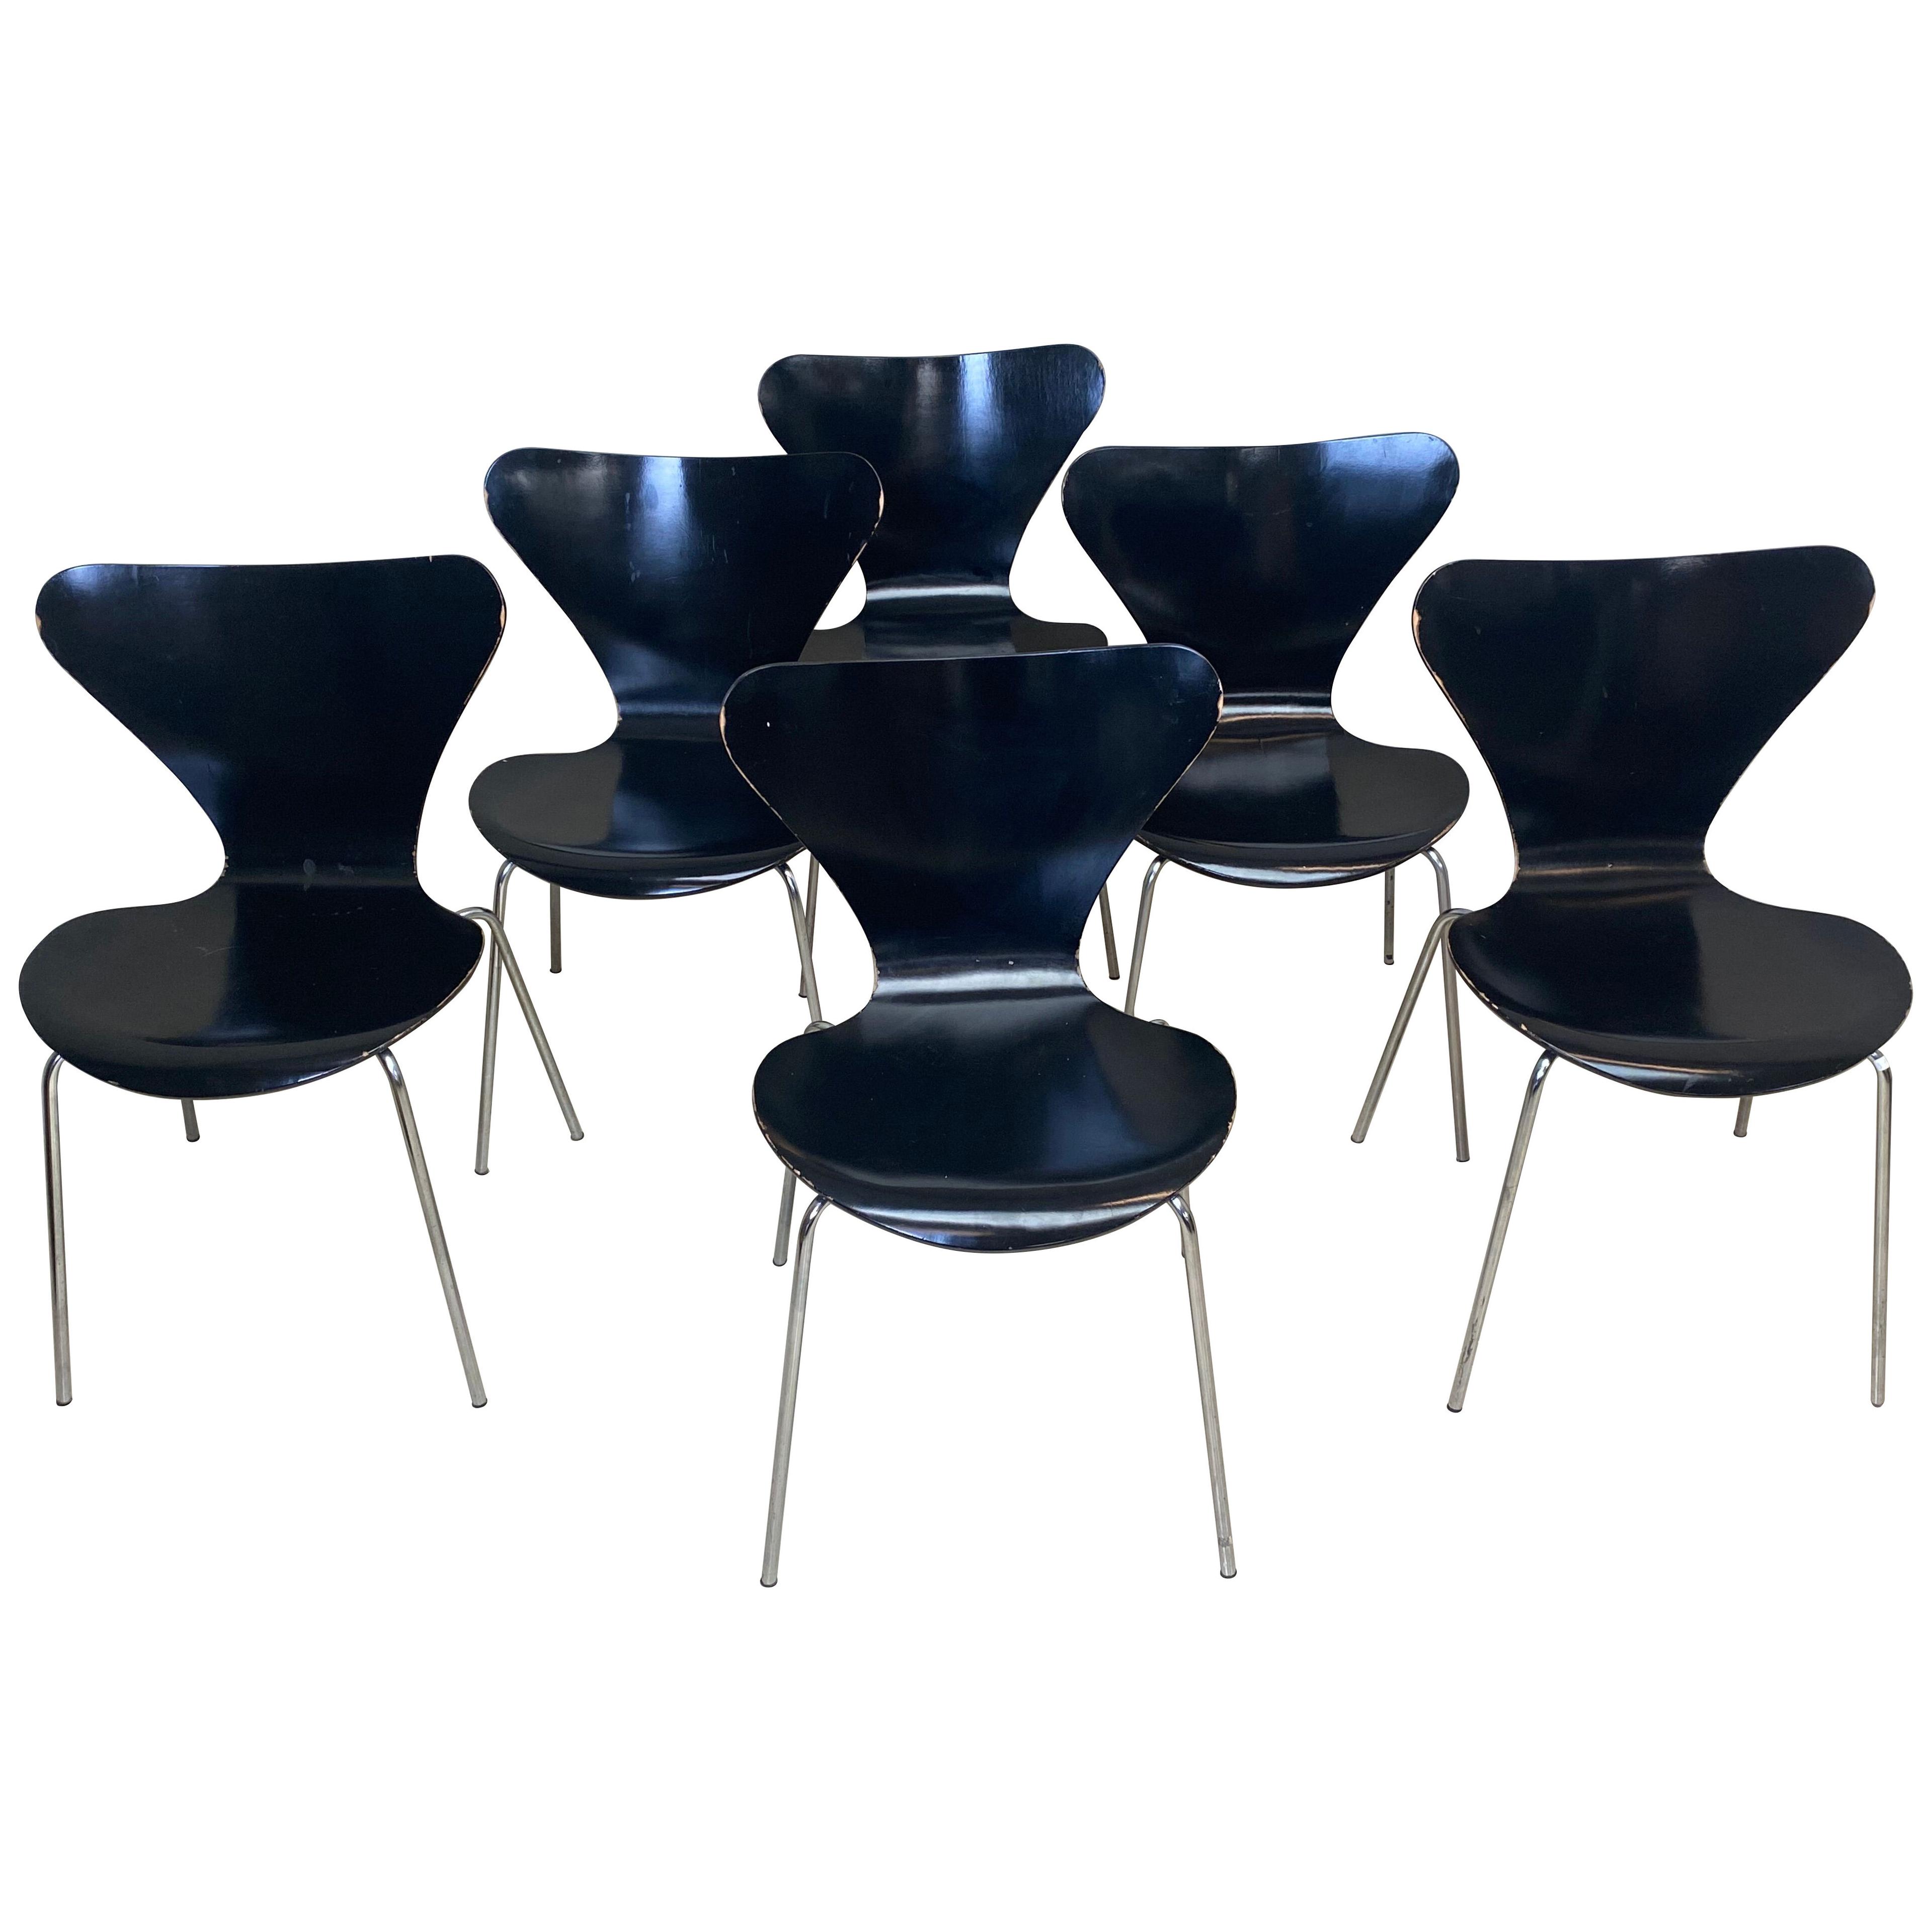 Set Of 6 Butterfly Chairs by Arne Jacobsen